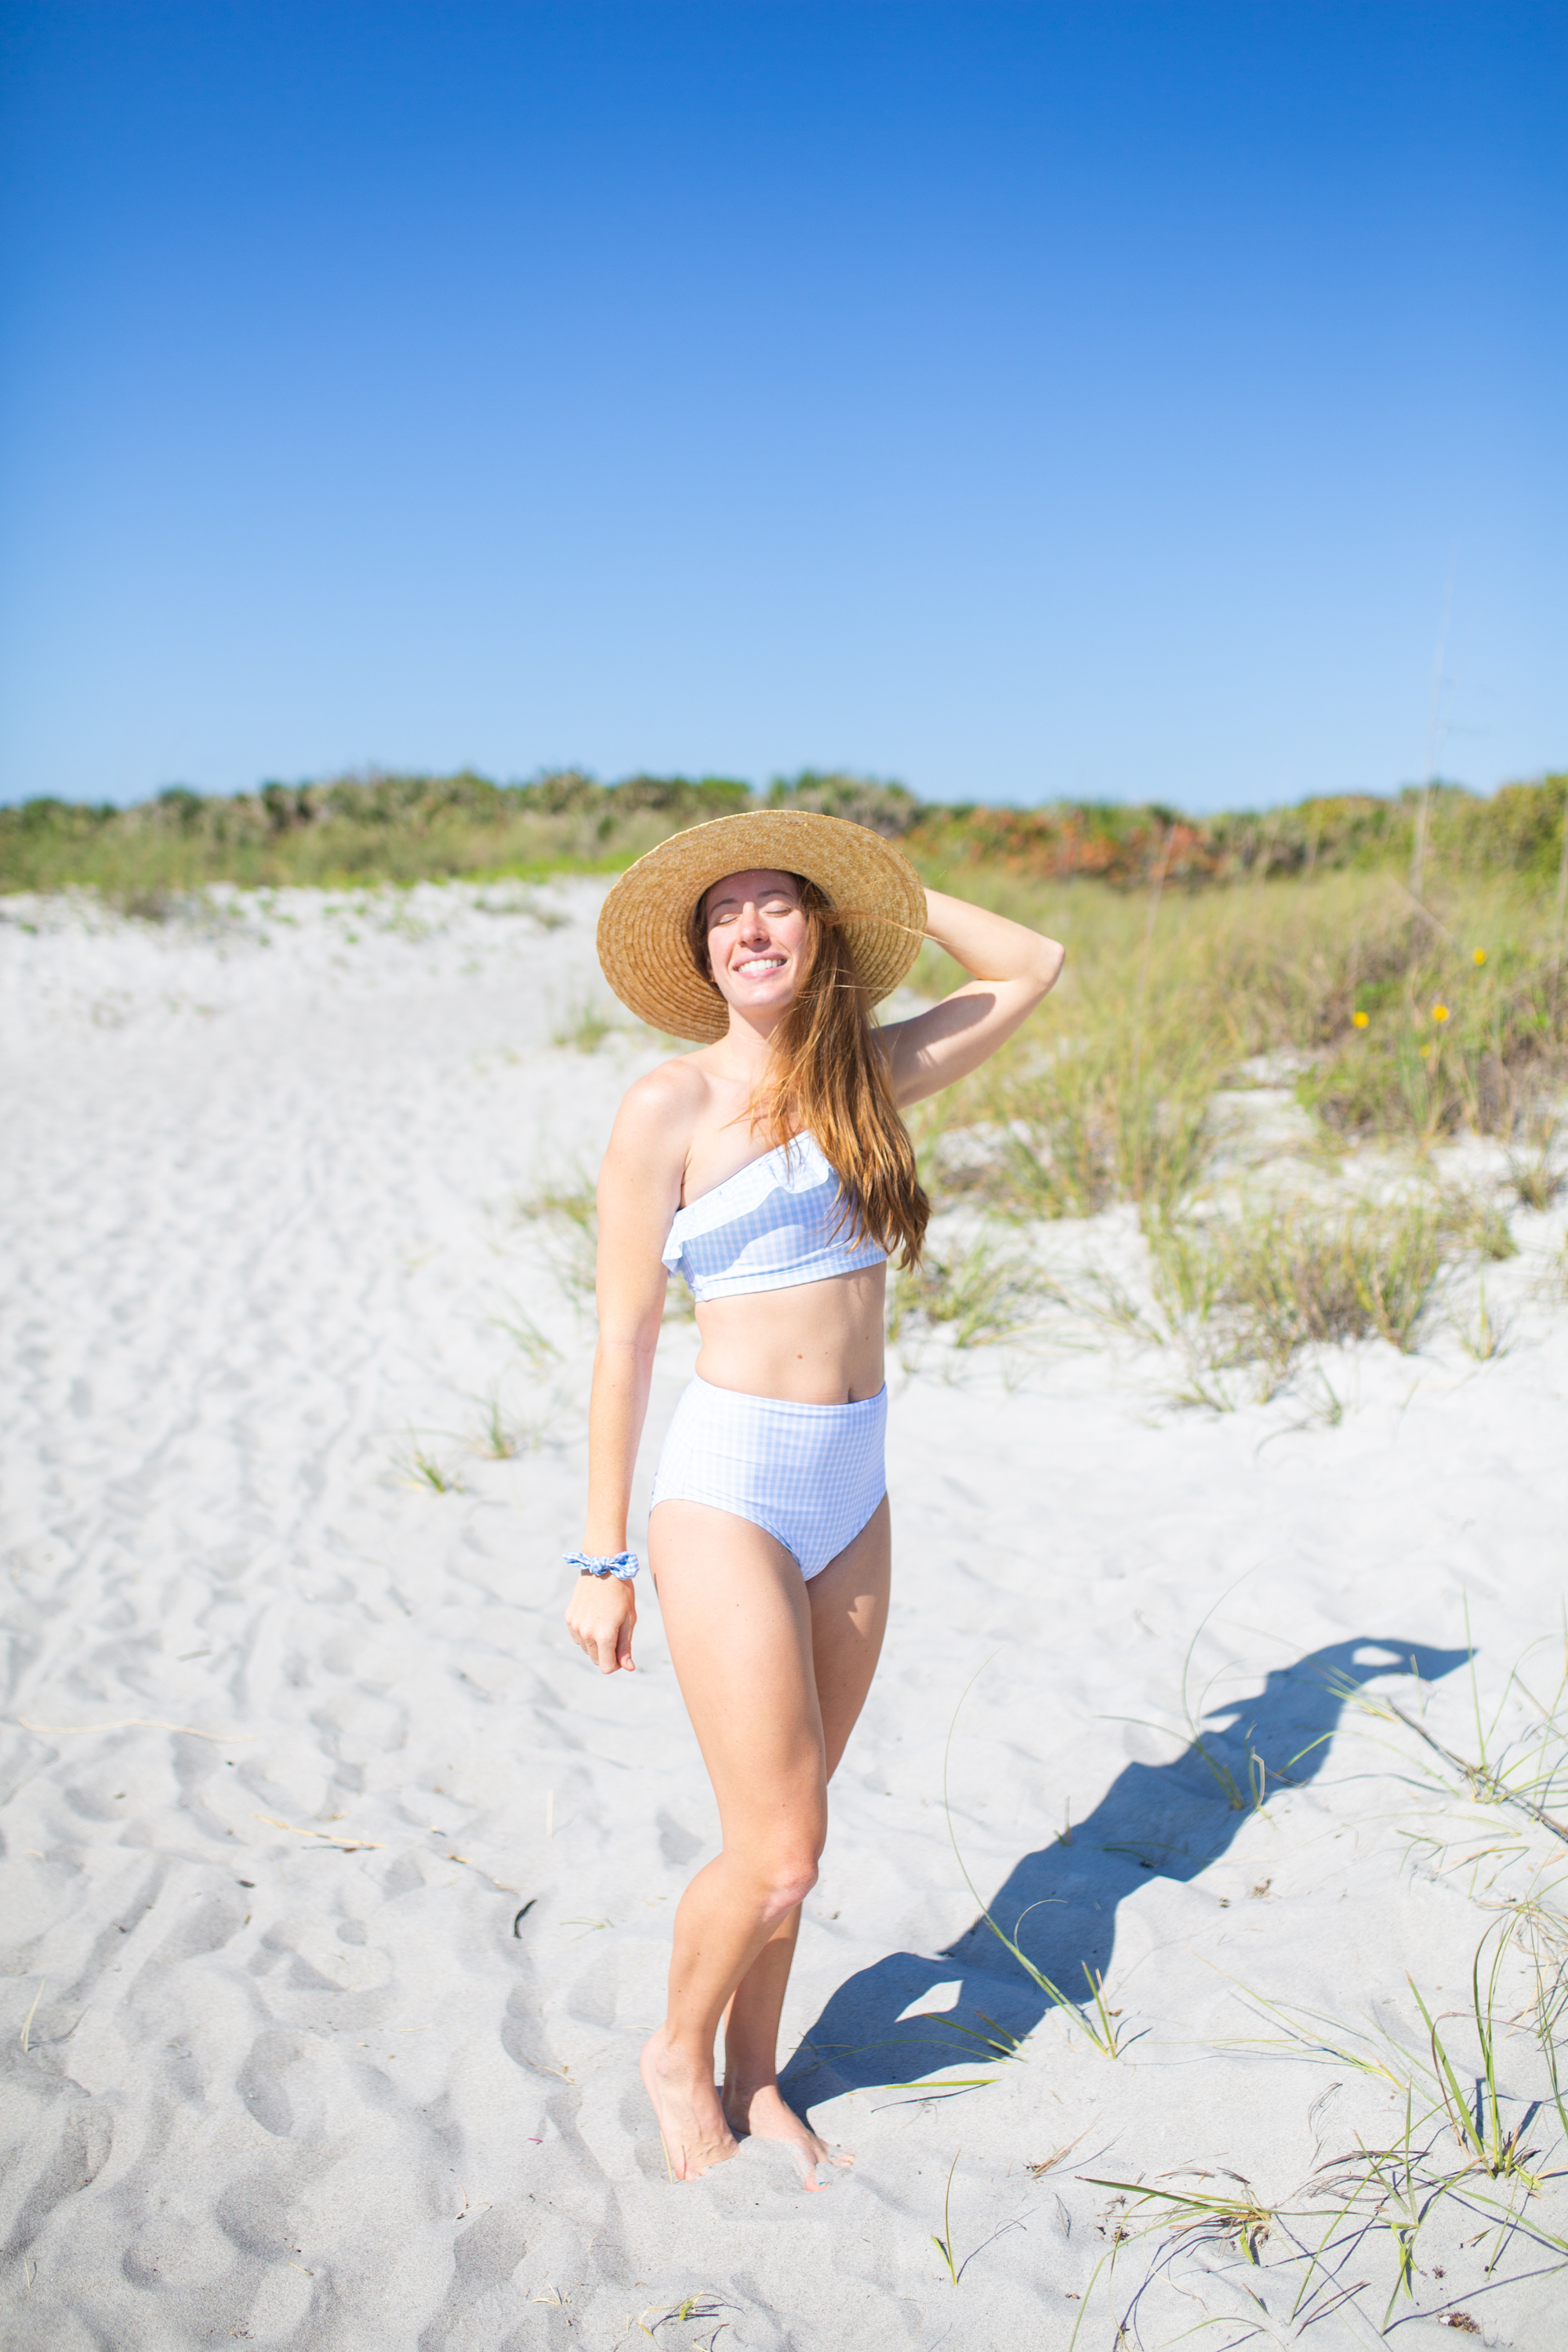 Ruffle One Shoulder Gingham Swimsuit Top / High Waisted Swimsuit / Beach Vacation Outfit / Summer Swimsuit / Sunshine Style - A Florida Based Fashion and Lifestyle Blog by Katie 